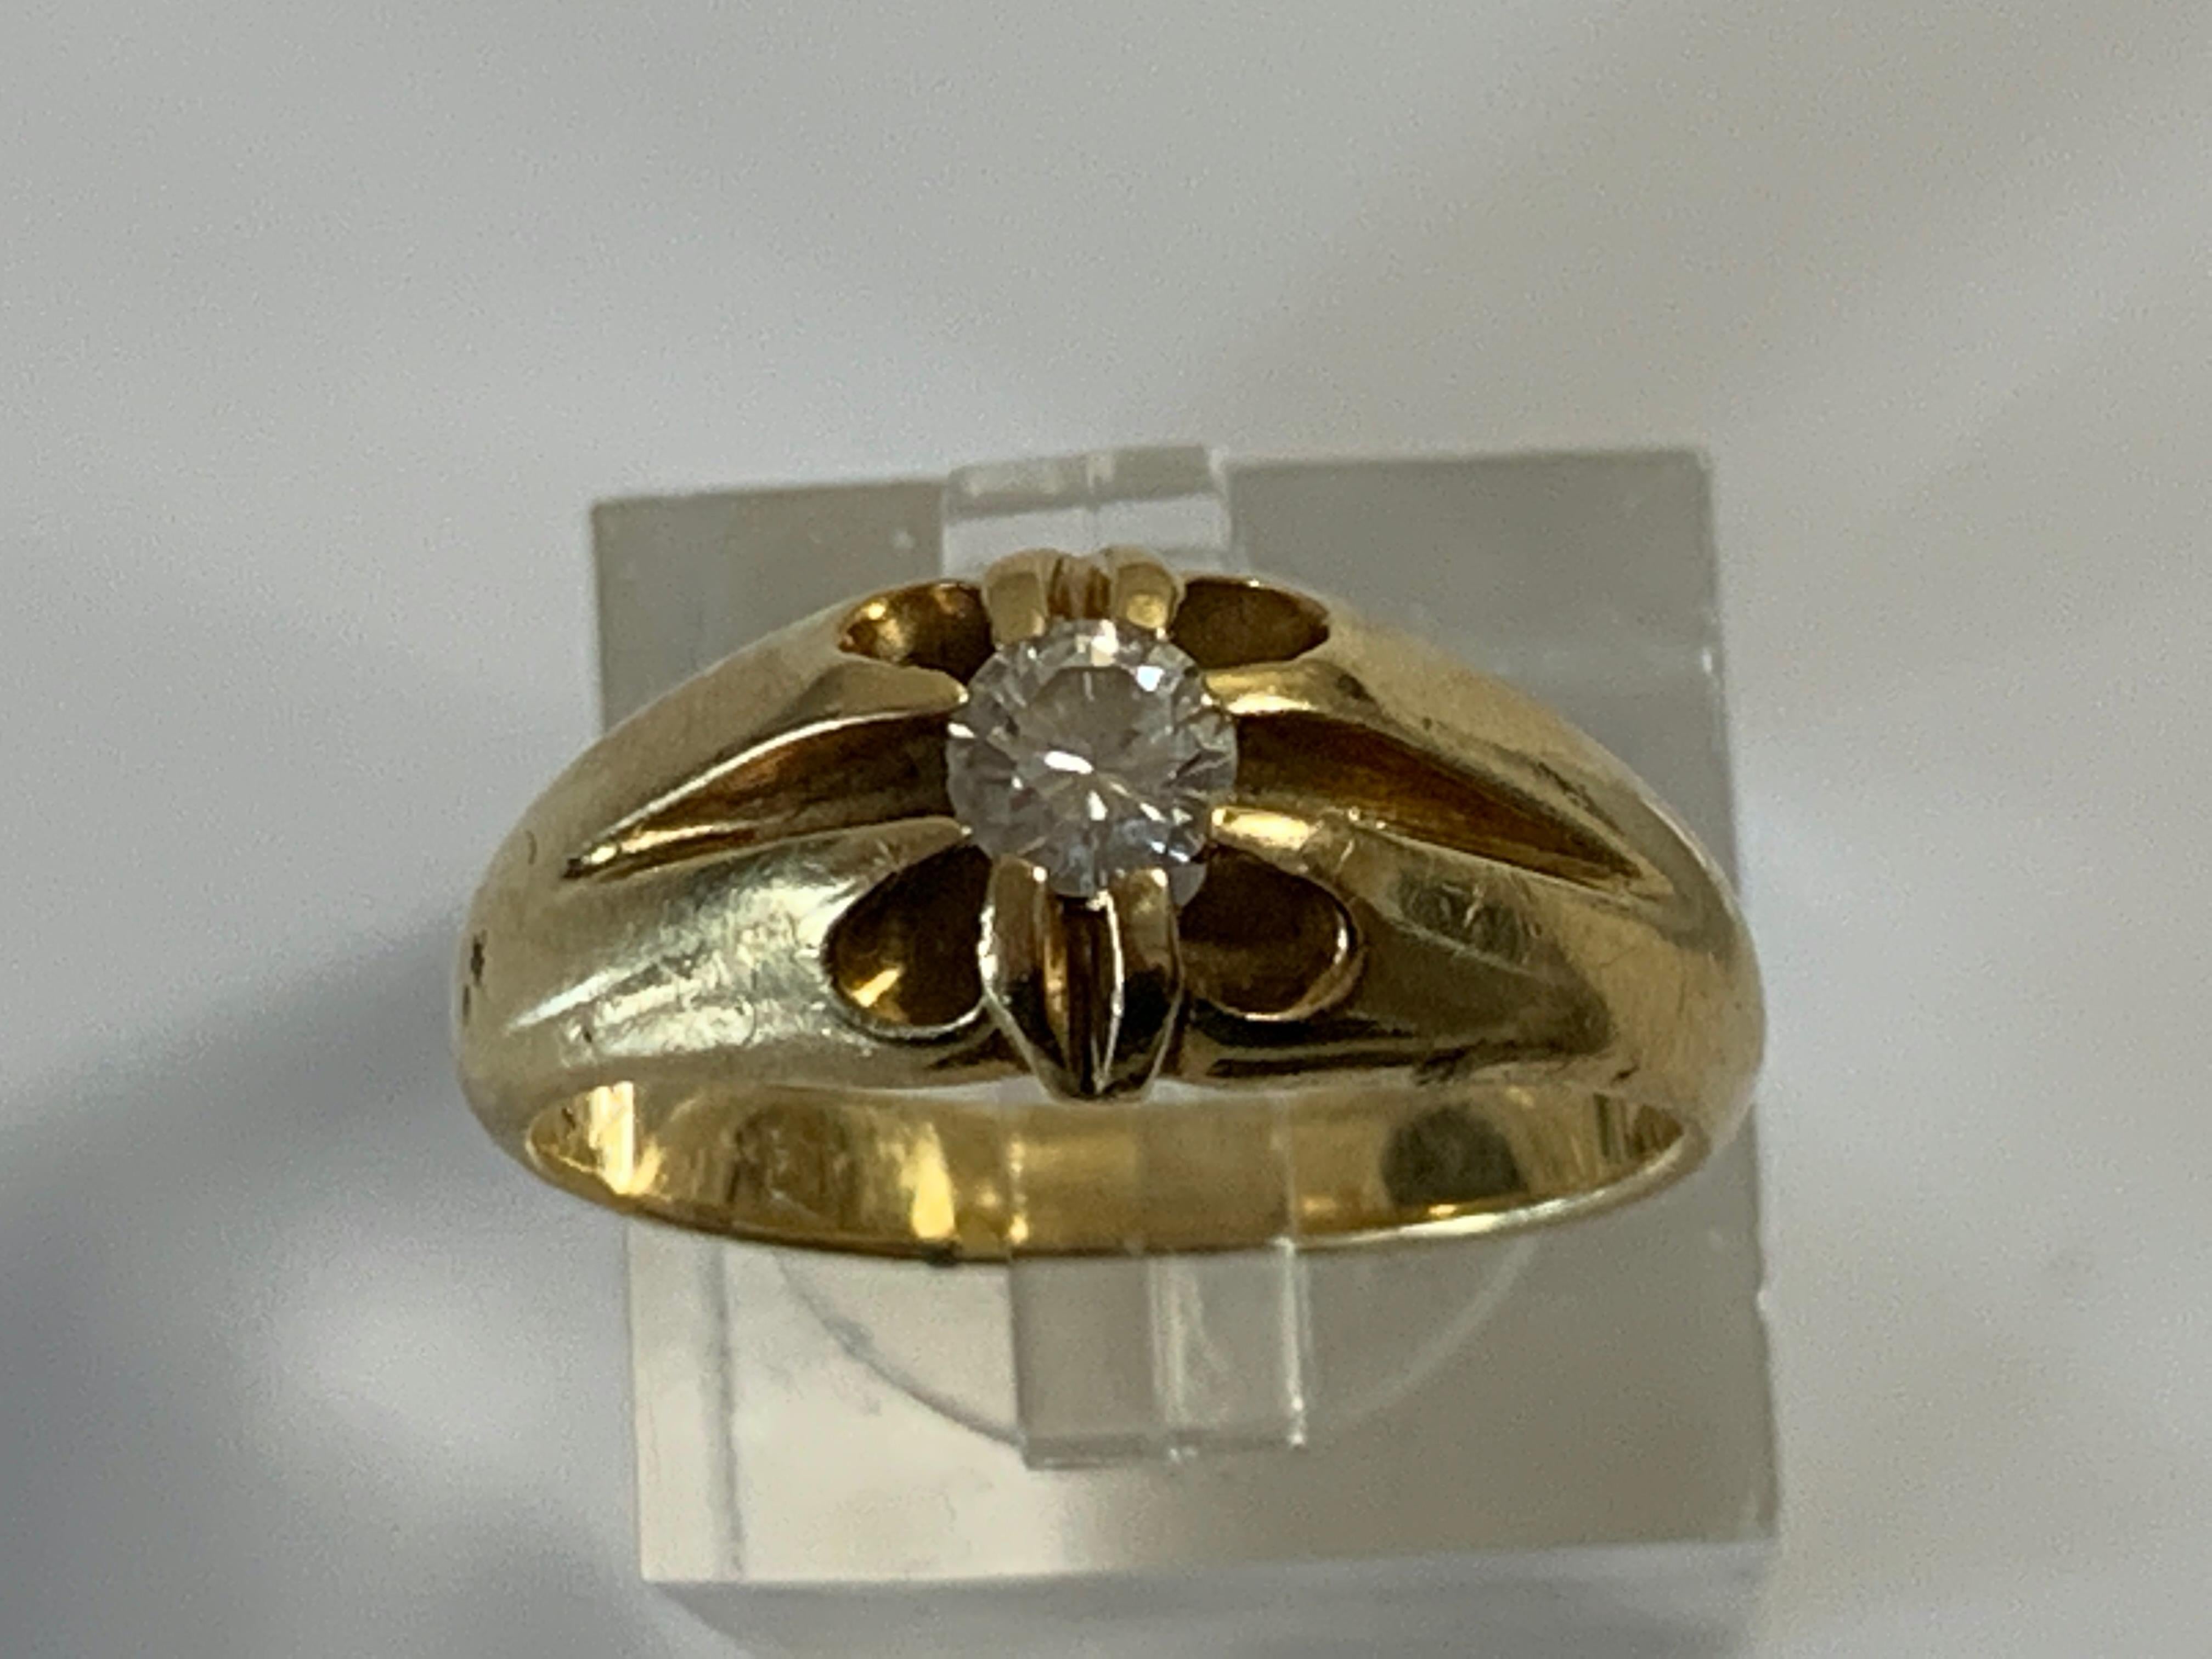 18ct 750 Gold 0.25 Carat Diamond Ring
Unknown era of actual Diamond
A very clear diamond - not flawless
But still a very beautiful diamond .
Diamond is Natural and is 0.25 Carat 
Single Solitaire that is Round .
Held firmly in place by 8 prongs
Band